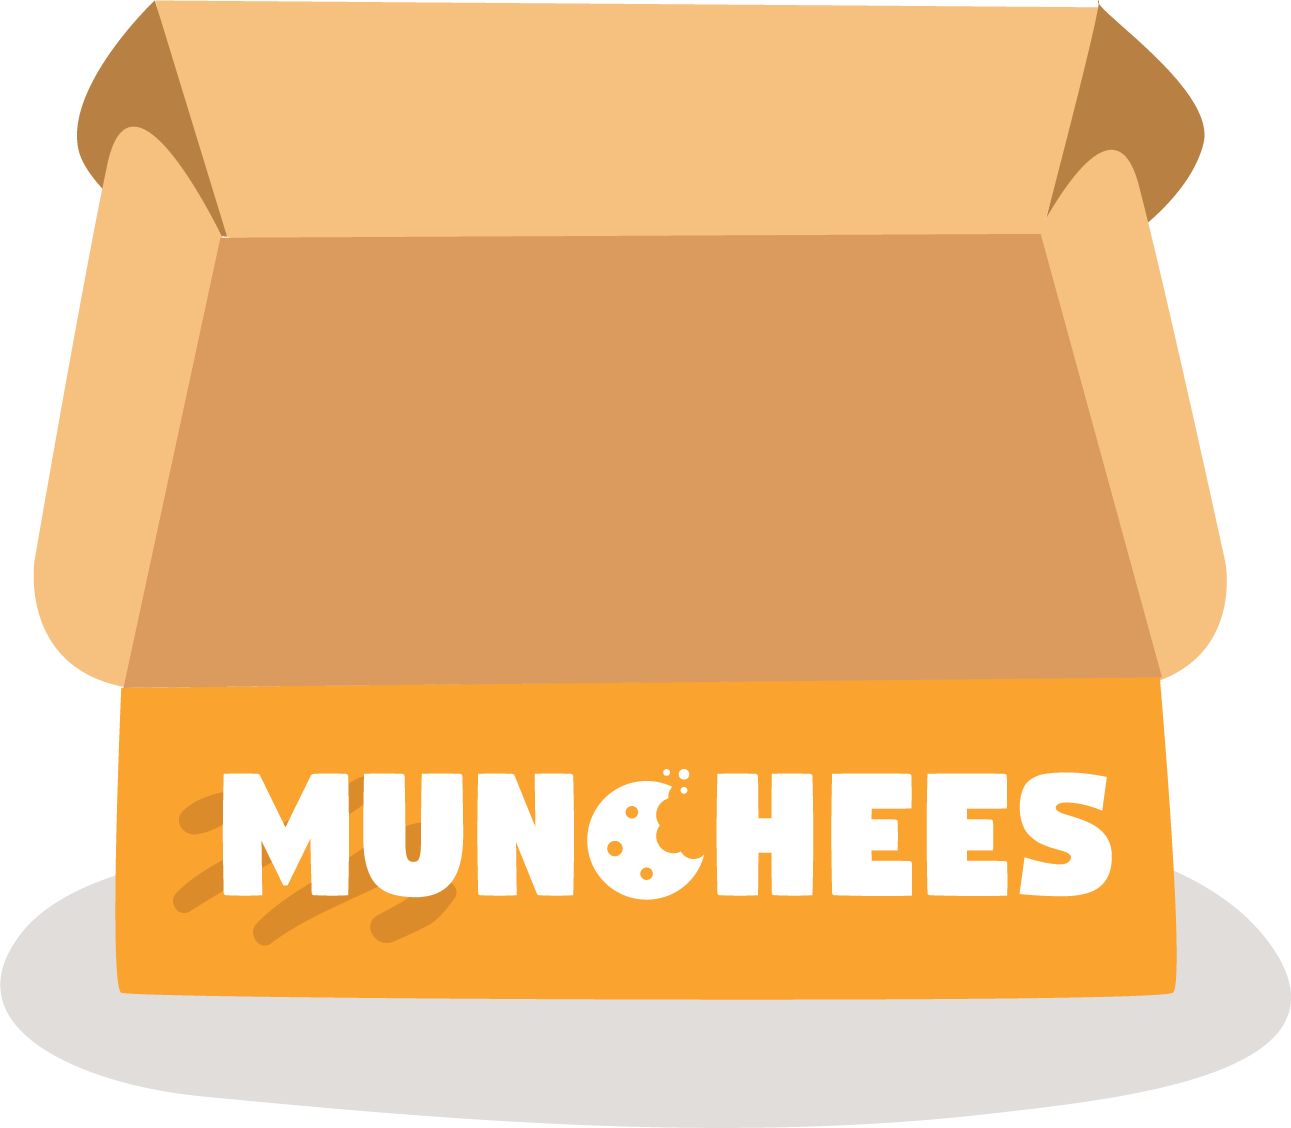 MUNCHEES Personal Snack Box for corporate gifting and office pantry